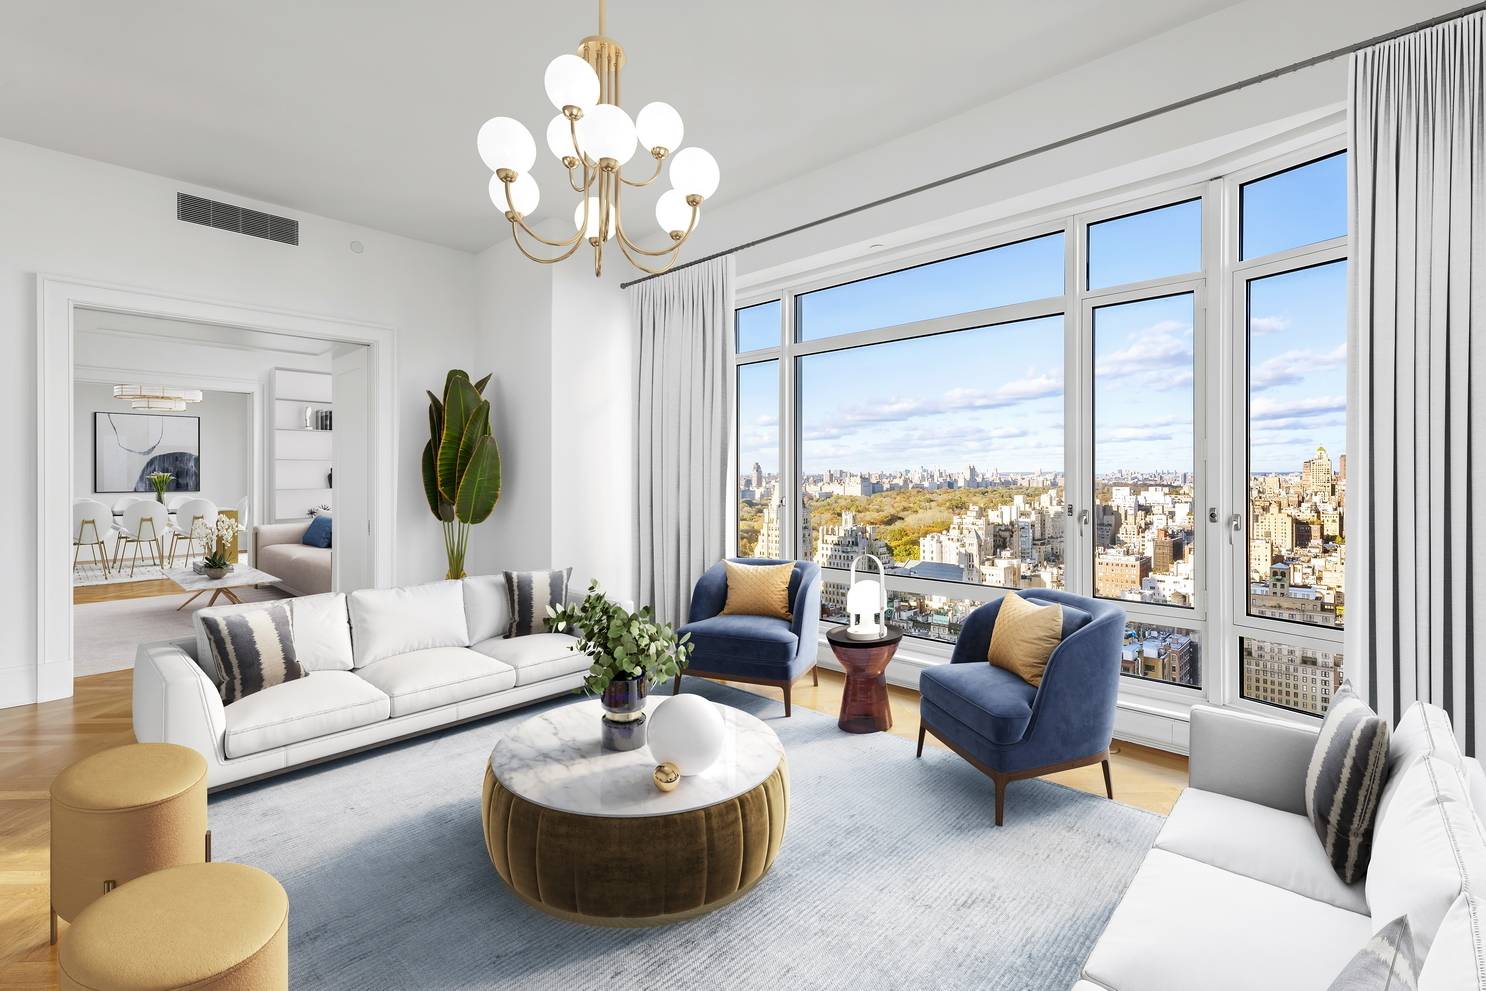 Palatial Sky Mansion with Expansive City Views A palatial full floor condo boasting bird's eye views of Central Park and the city skyline, this convertible 4 bedroom, 5 bathroom home ...